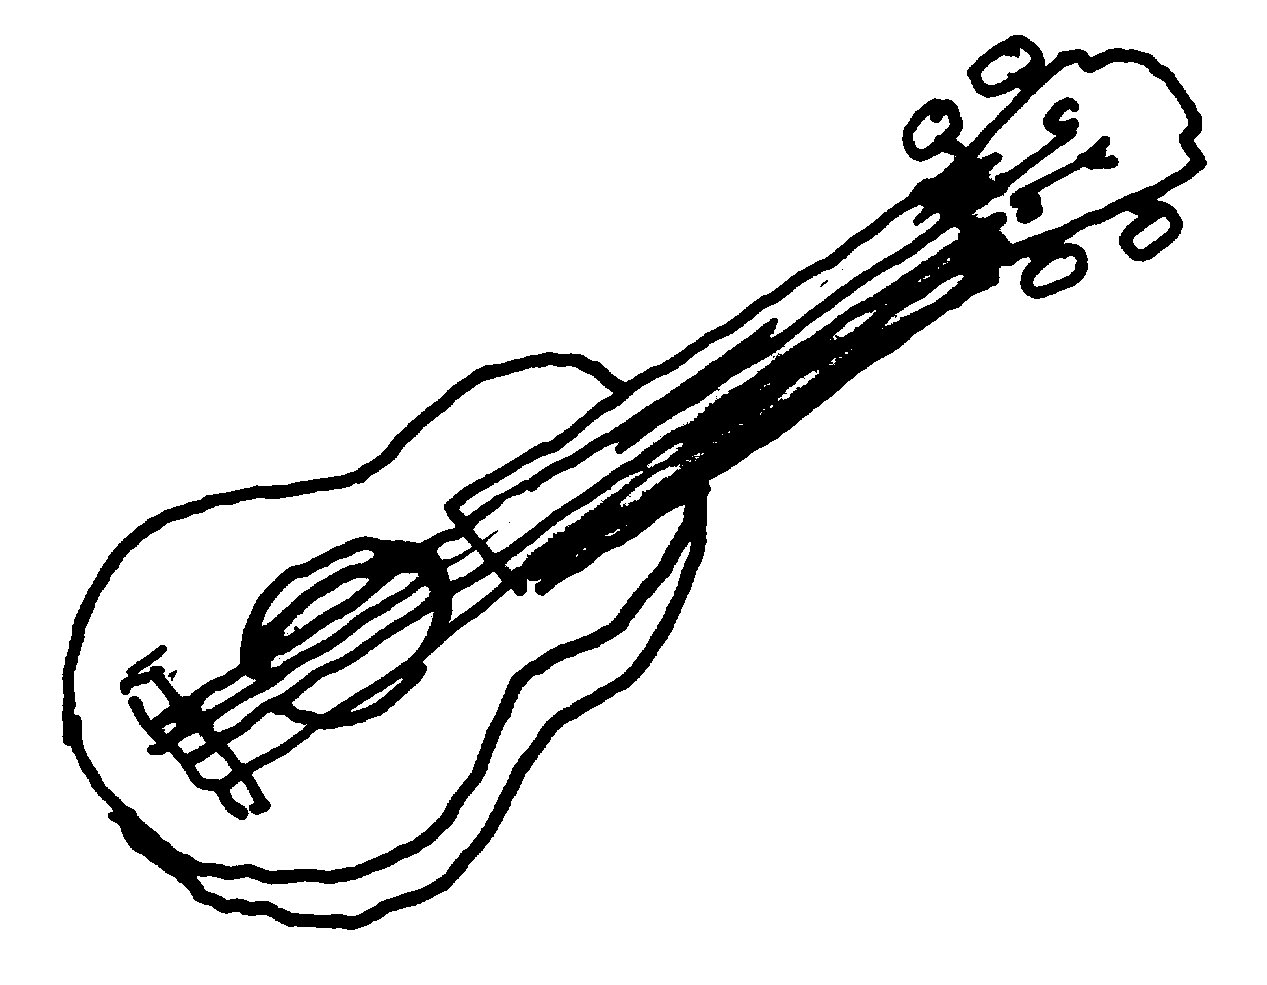 Band musical instruments clipart 